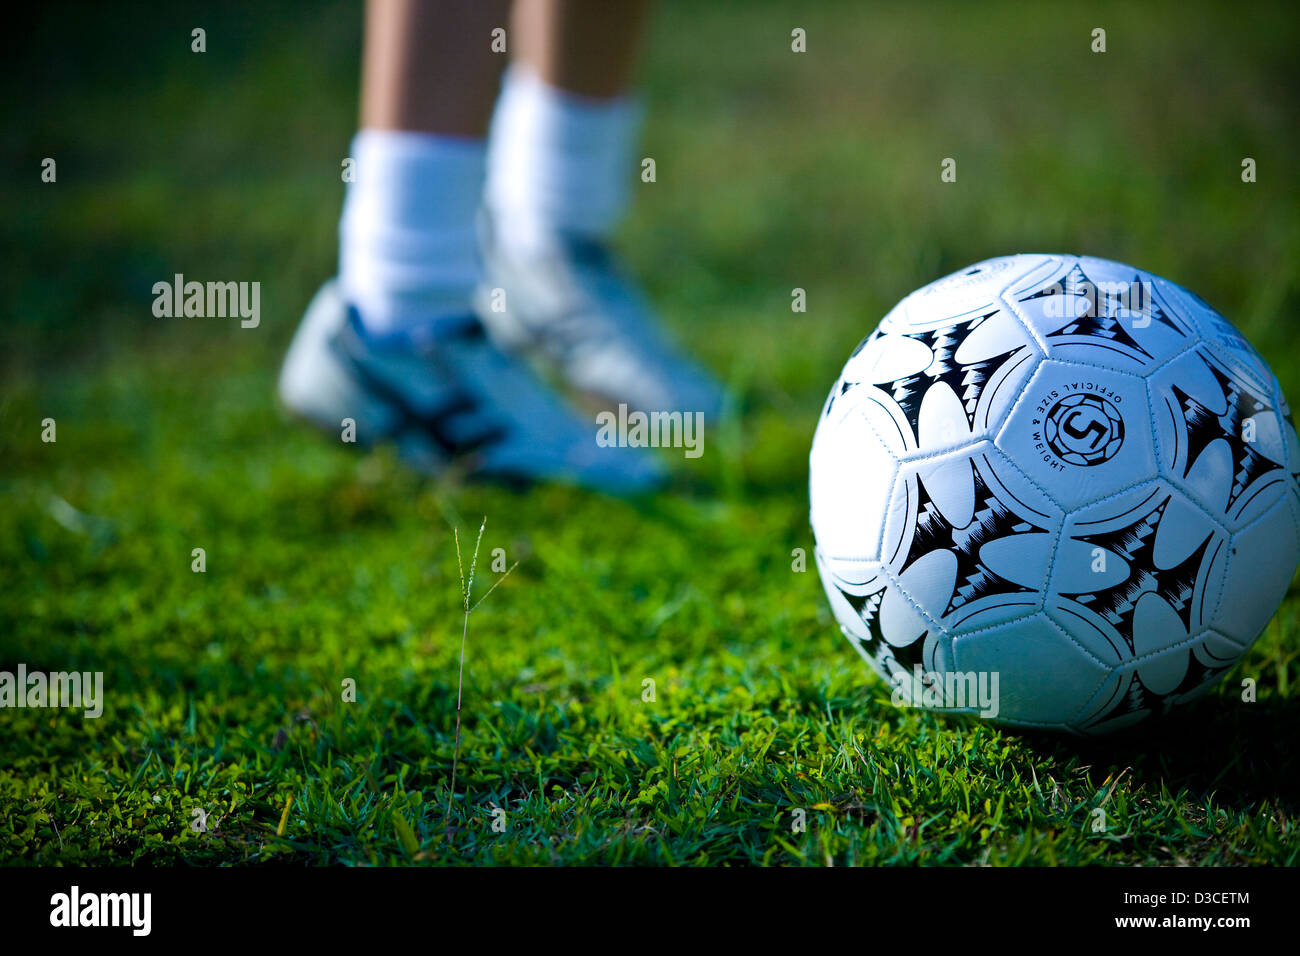 Image of close up football on green playing field person warming up in background Stock Photo